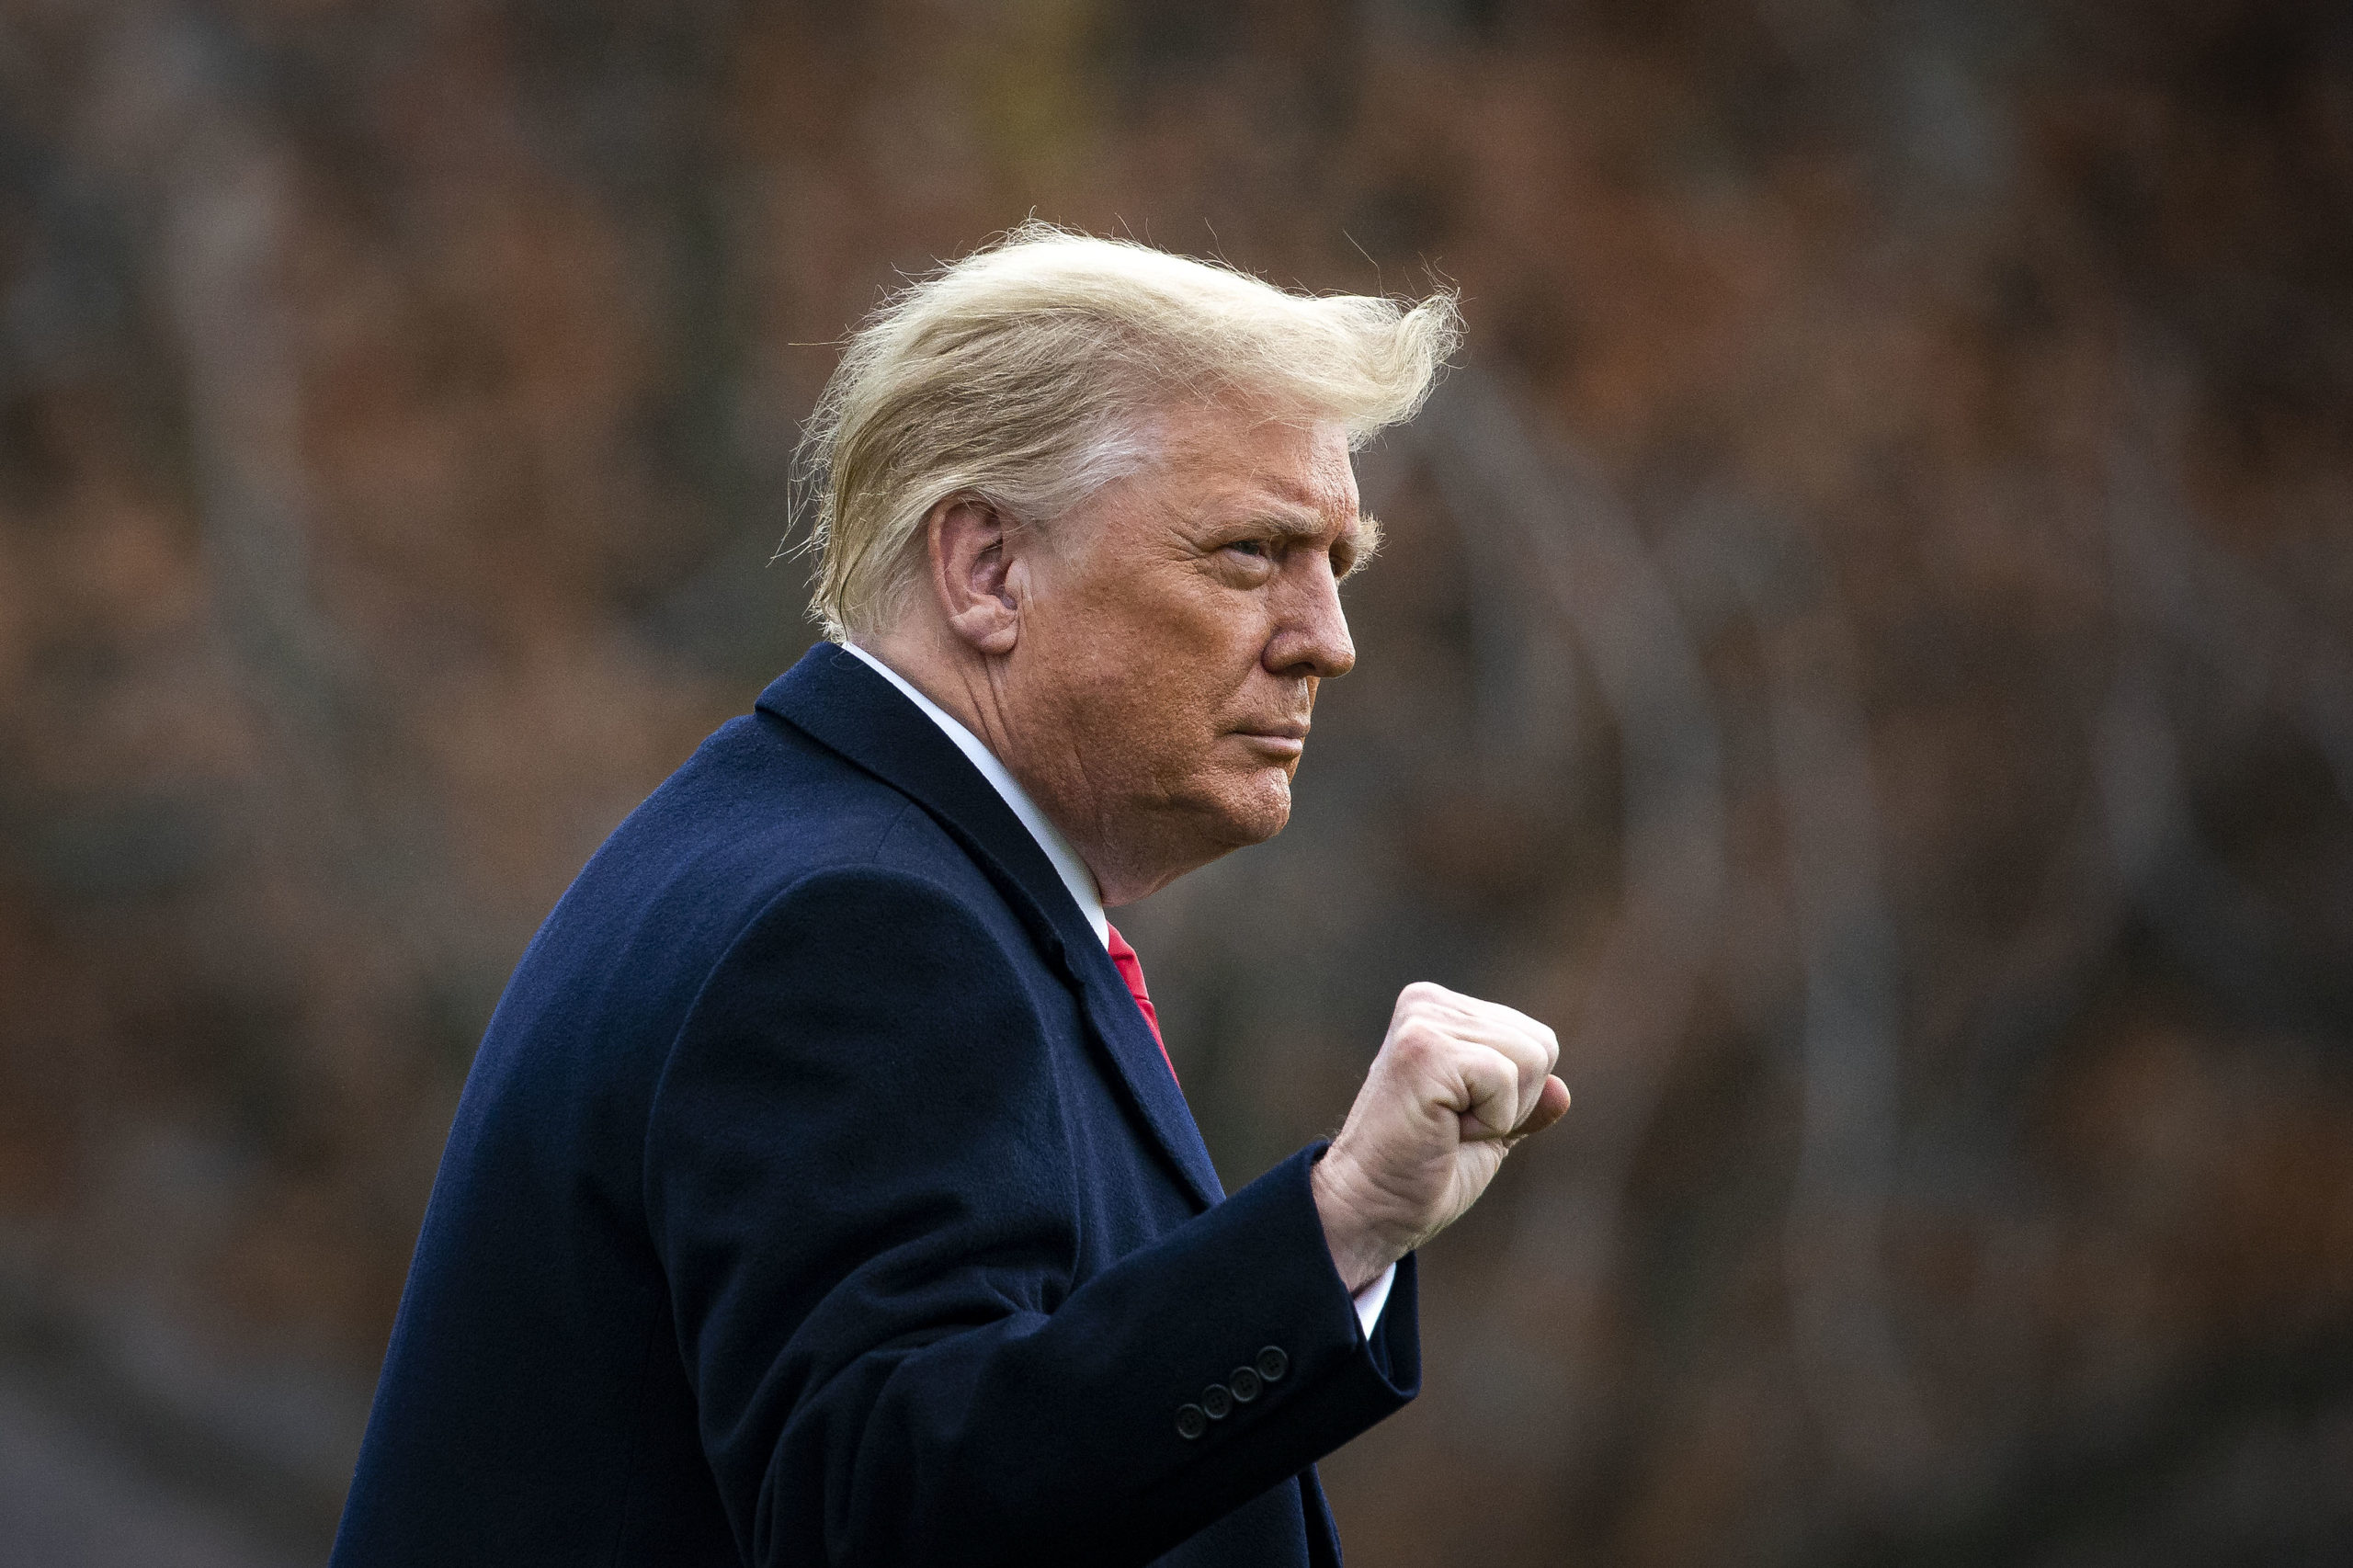 WASHINGTON, DC - DECEMBER 12: U.S. President Donald Trump pumps his fist as he departs on the South Lawn of the White House, on December 12, 2020 in Washington, DC. Trump is traveling to the Army versus Navy Football Game at the United States Military Academy in West Point, NY. (Photo by Al Drago/Getty Images)